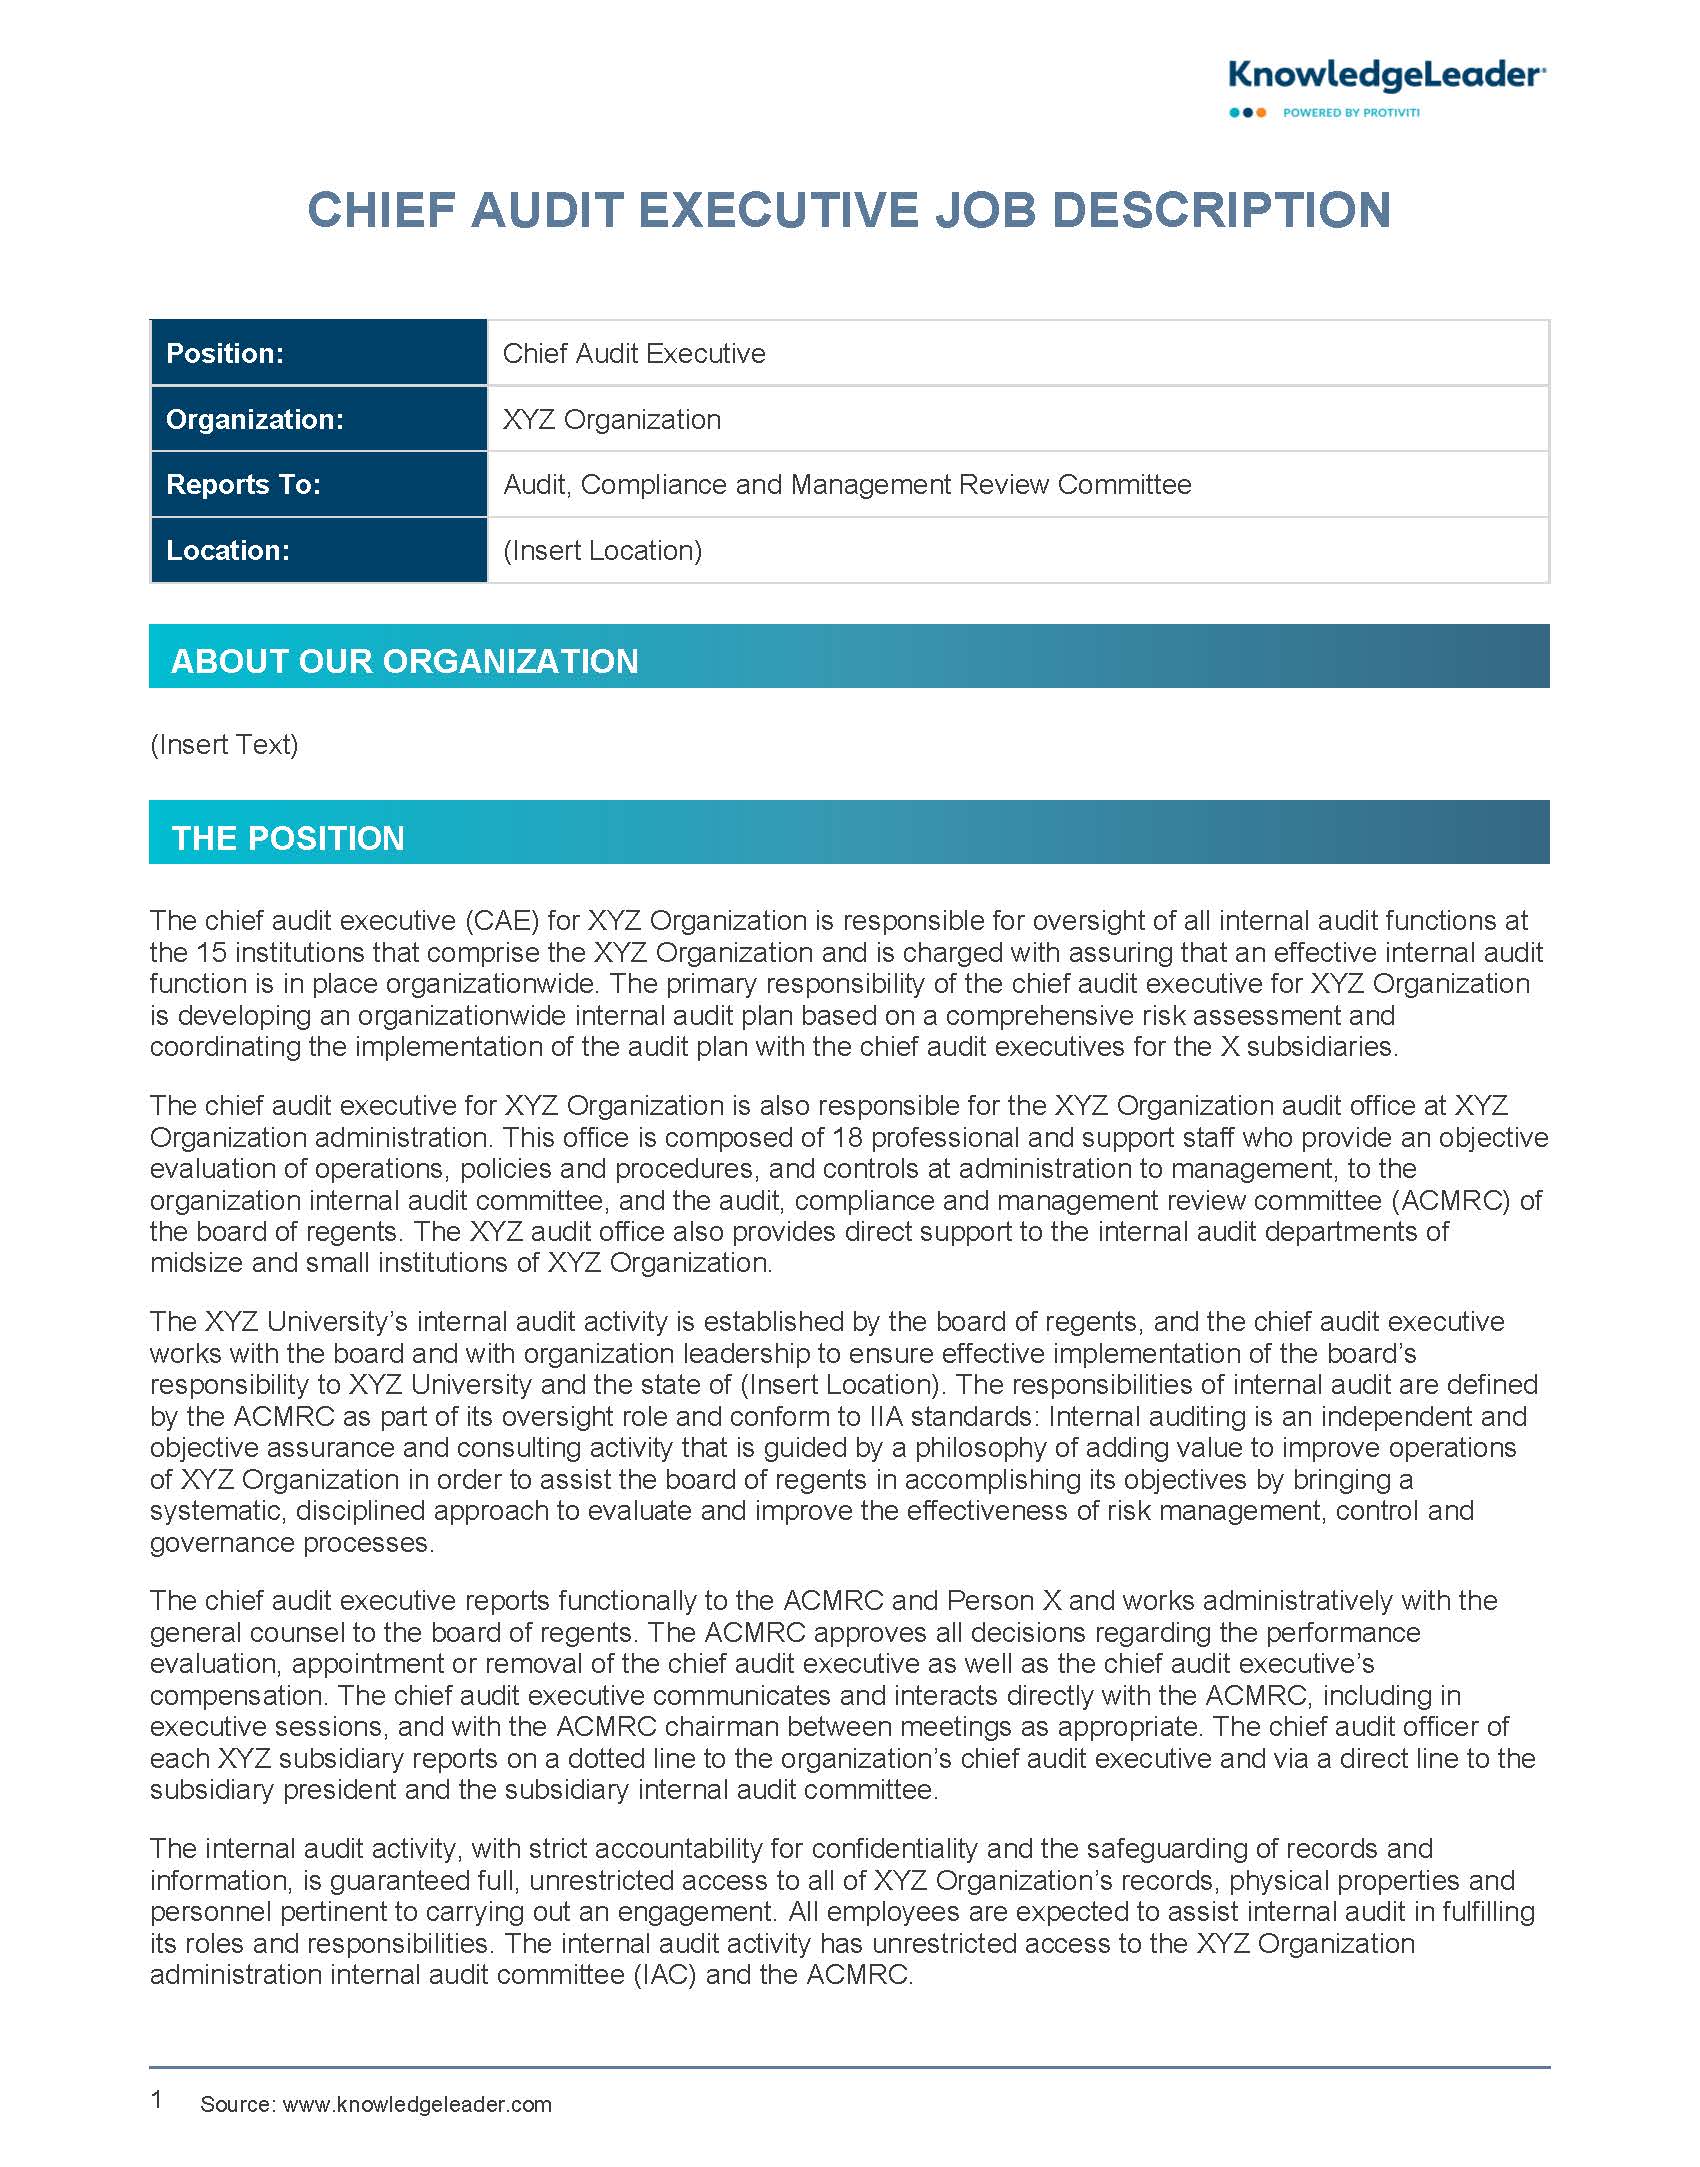 Screenshot of the first page of Chief Audit Executive Job Description